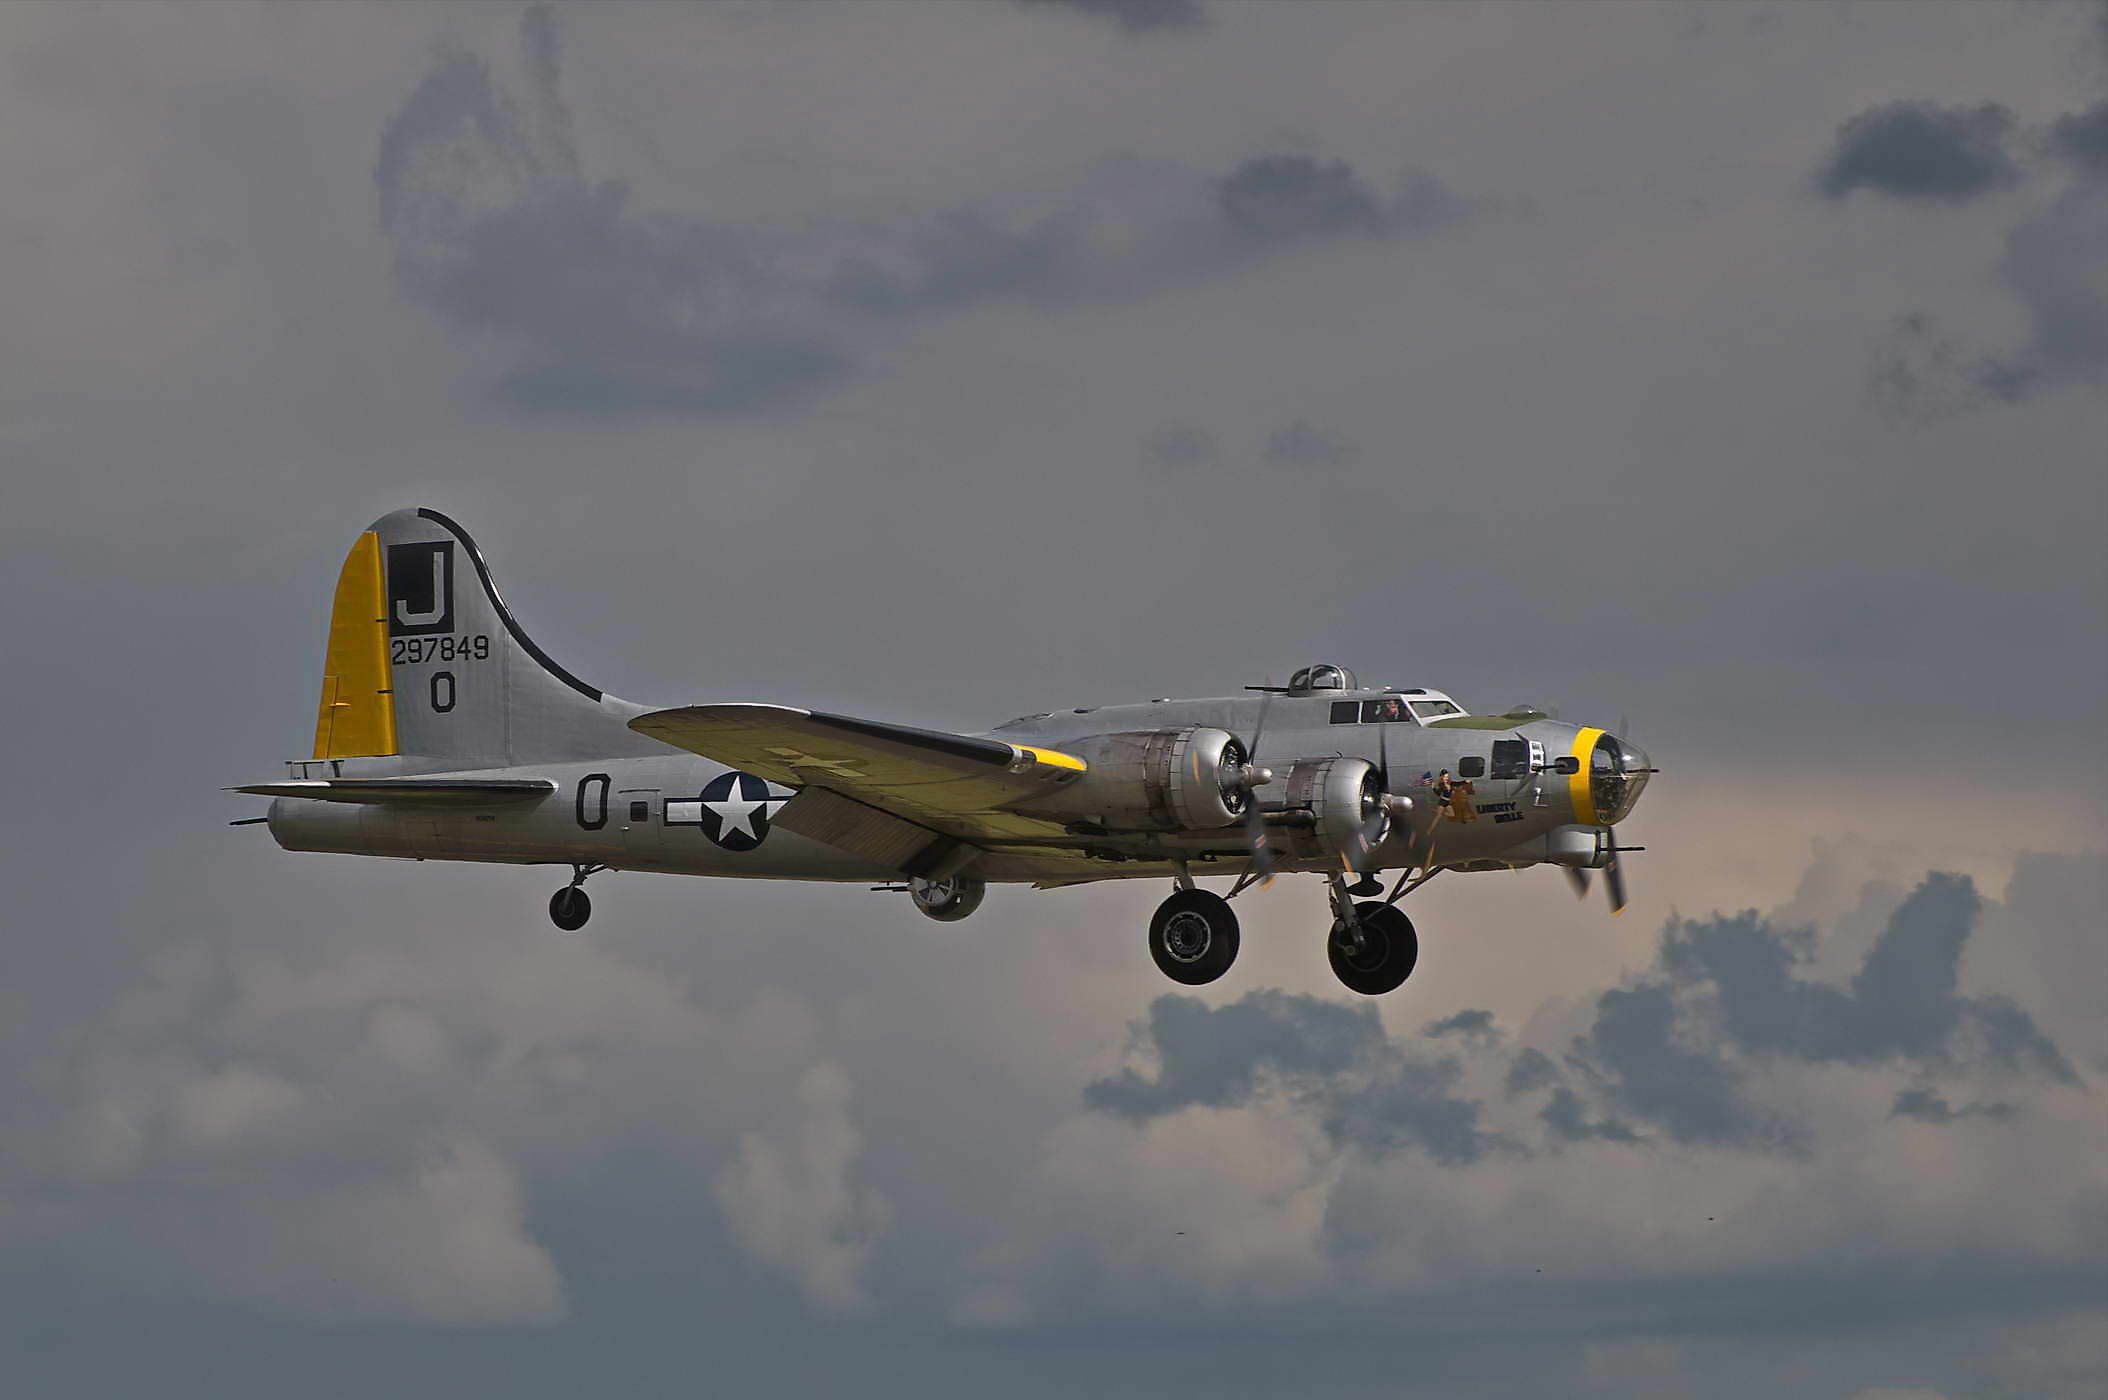 B-17G-105 Flying Fortress 44-85734 "Liberty Belle"